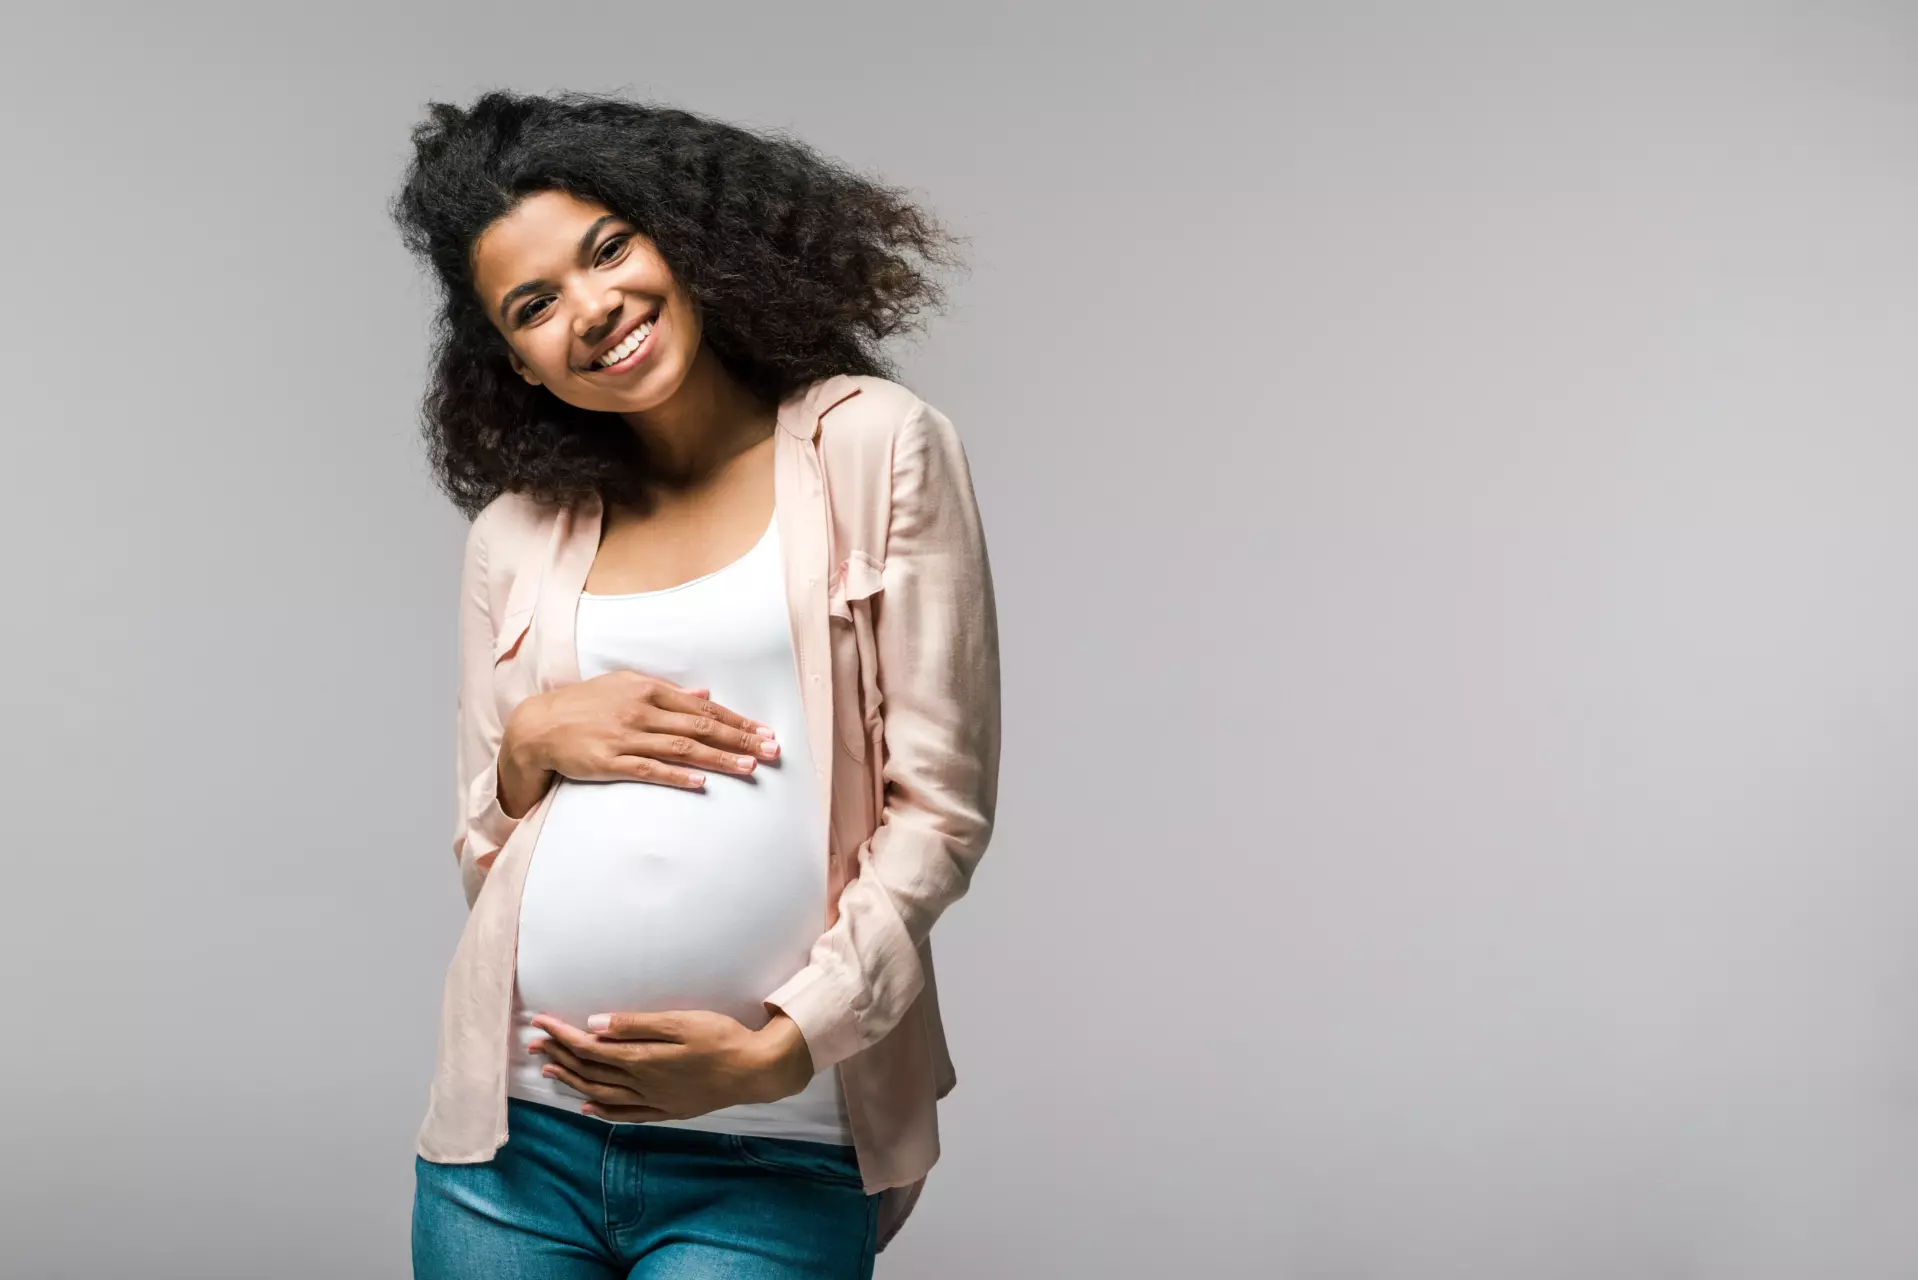 A pregnant woman holding her stomach and smiling into the camera.